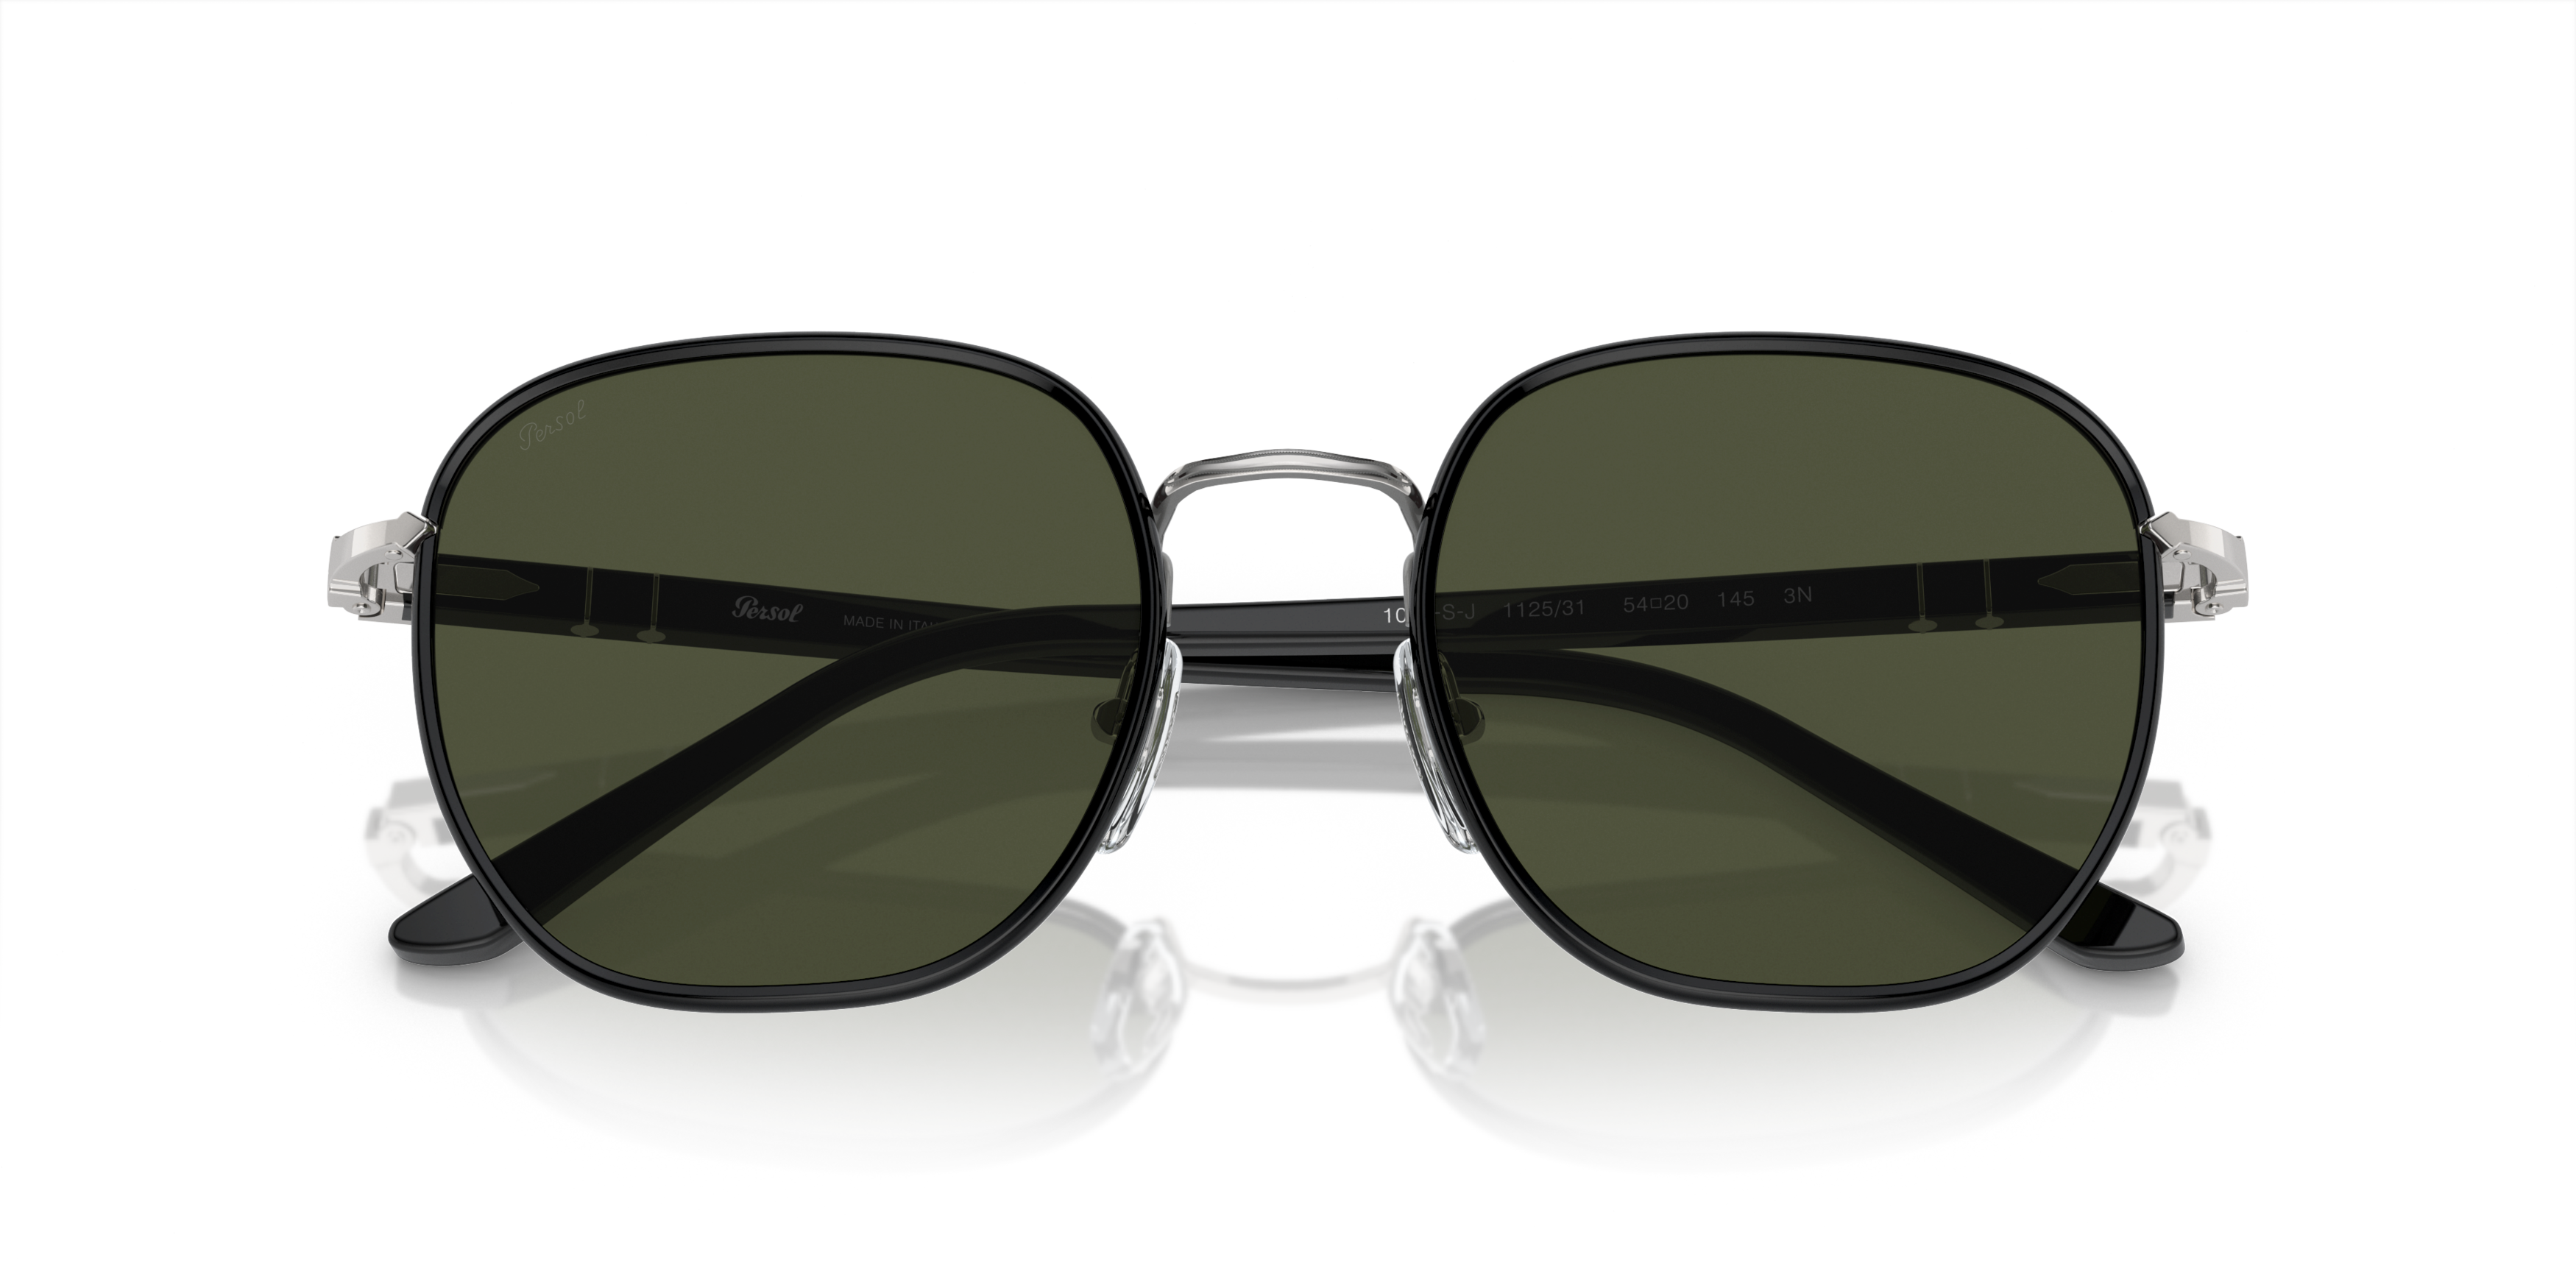 [products.image.folded] Persol 0PO1015SJ 112531